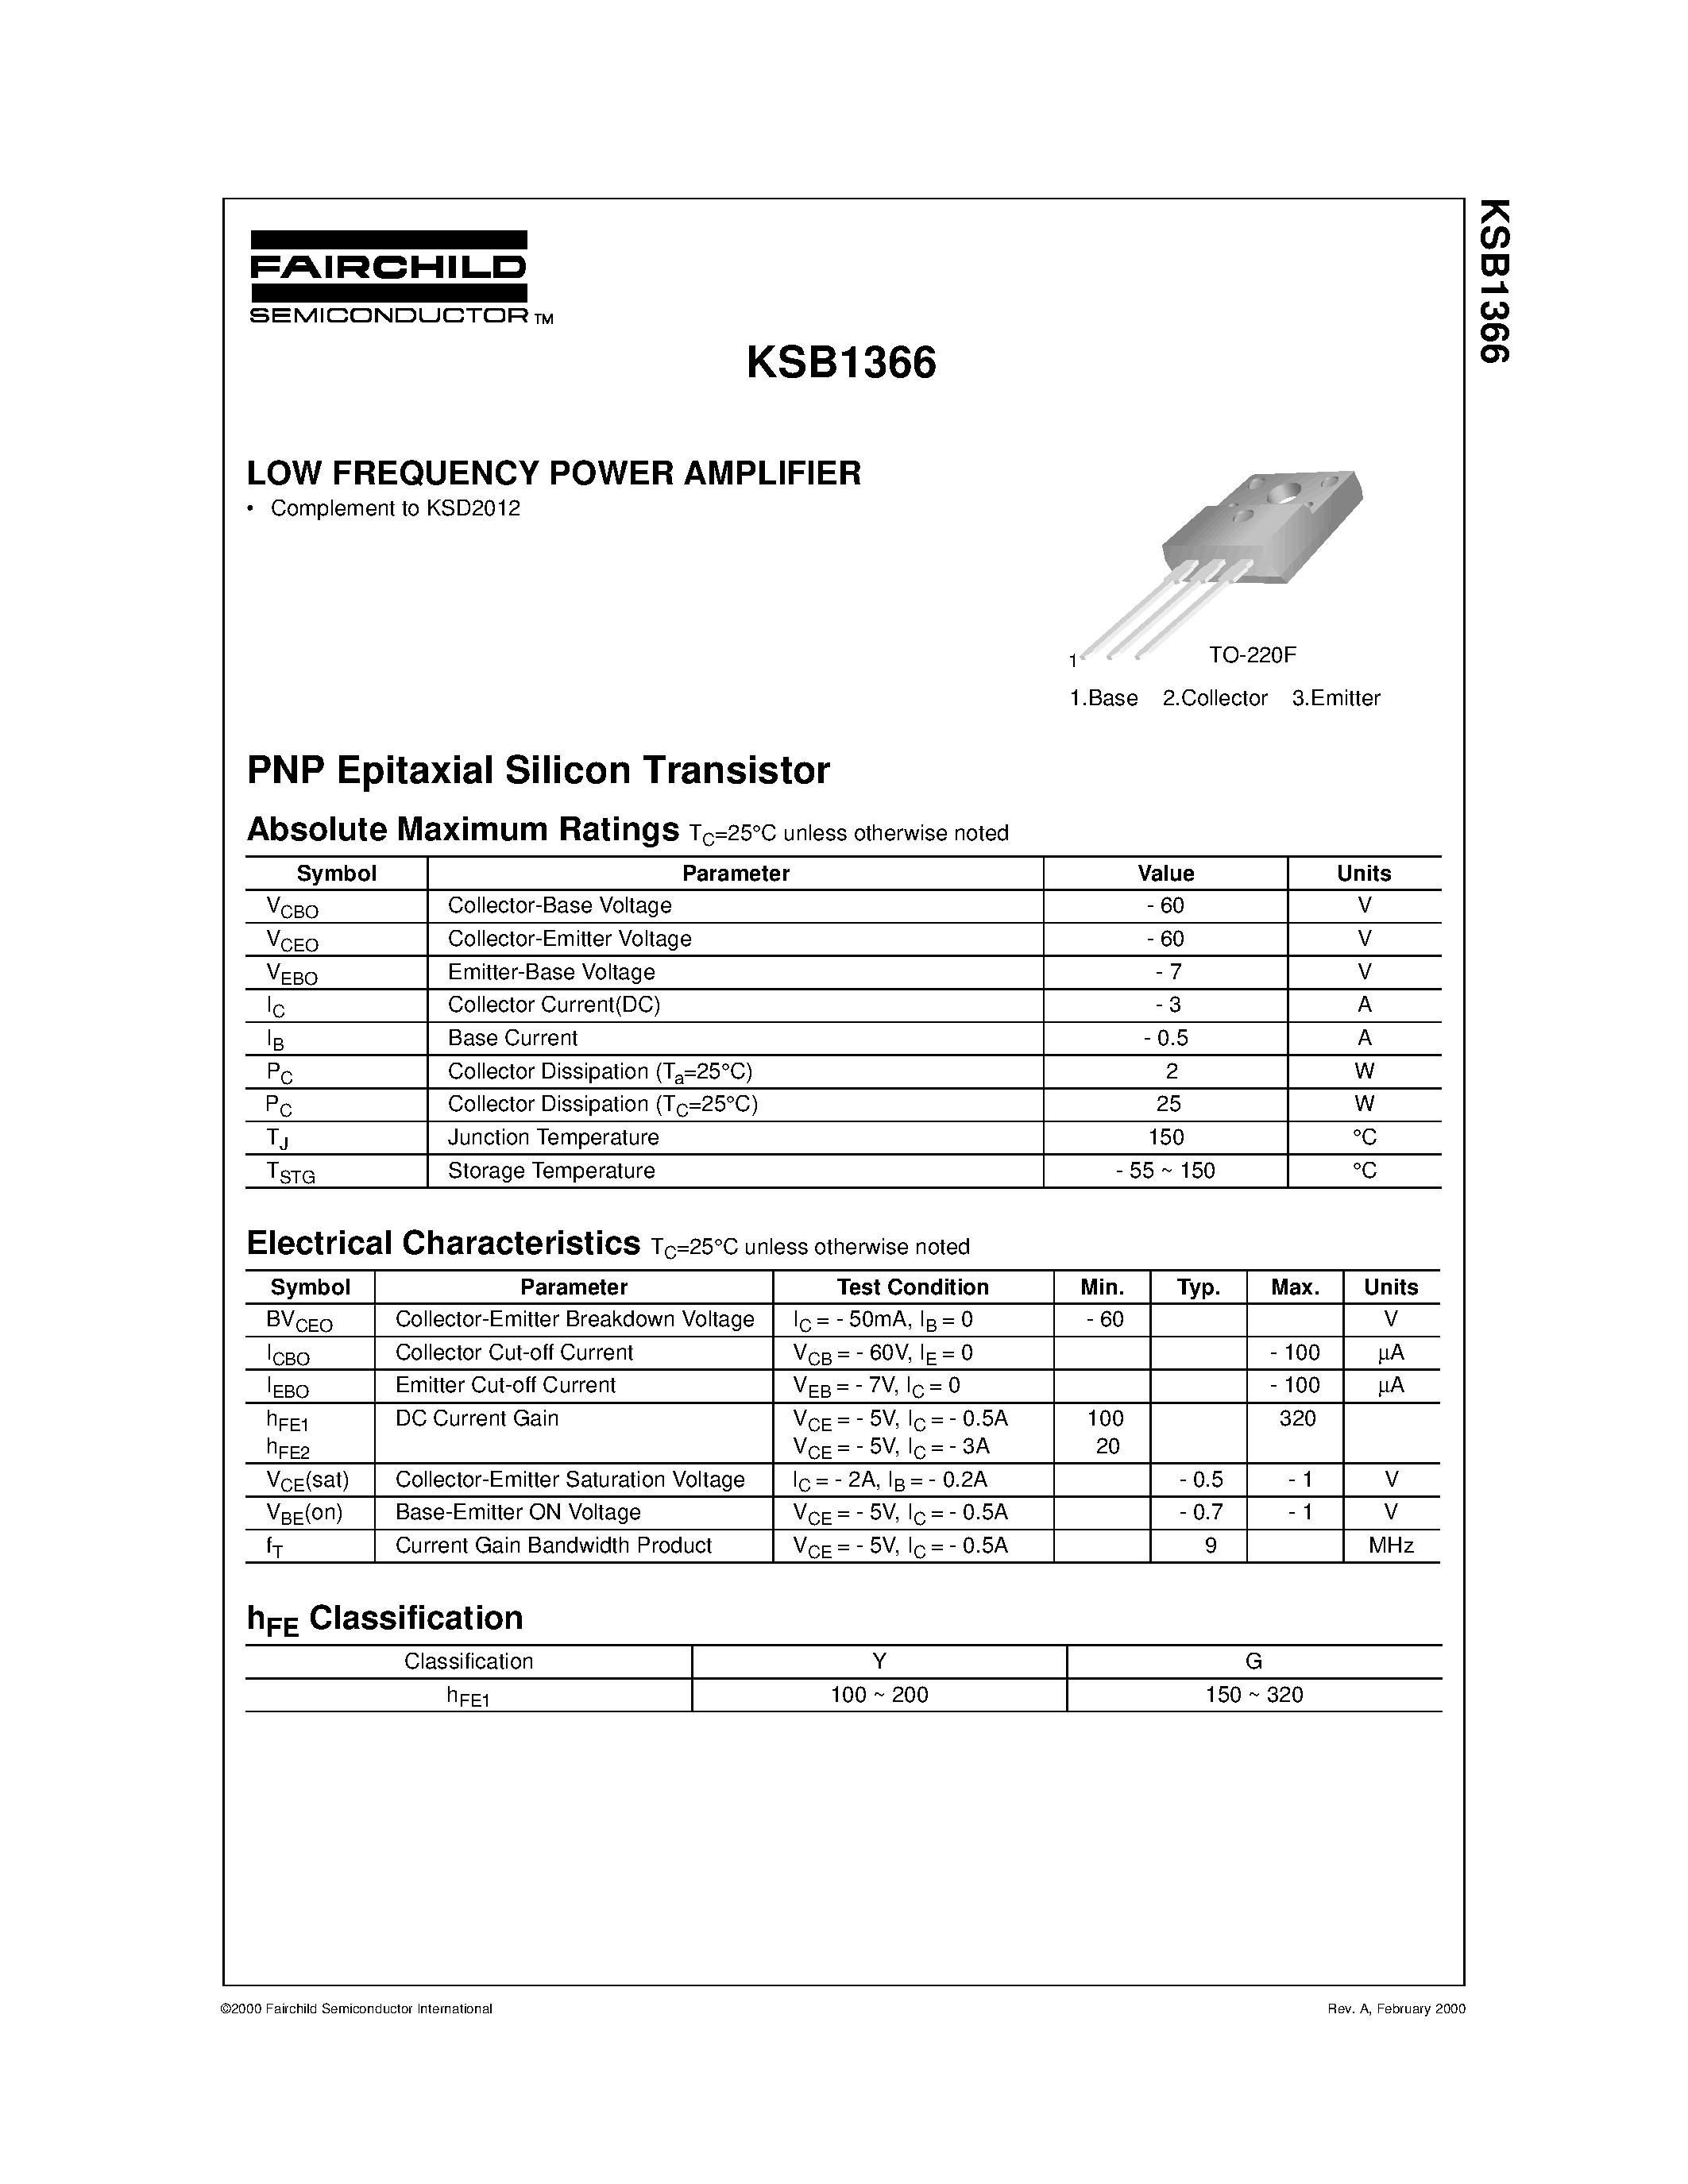 Datasheet KSB1366 - LOW FREQUENCY POWER AMPLIFIER page 1